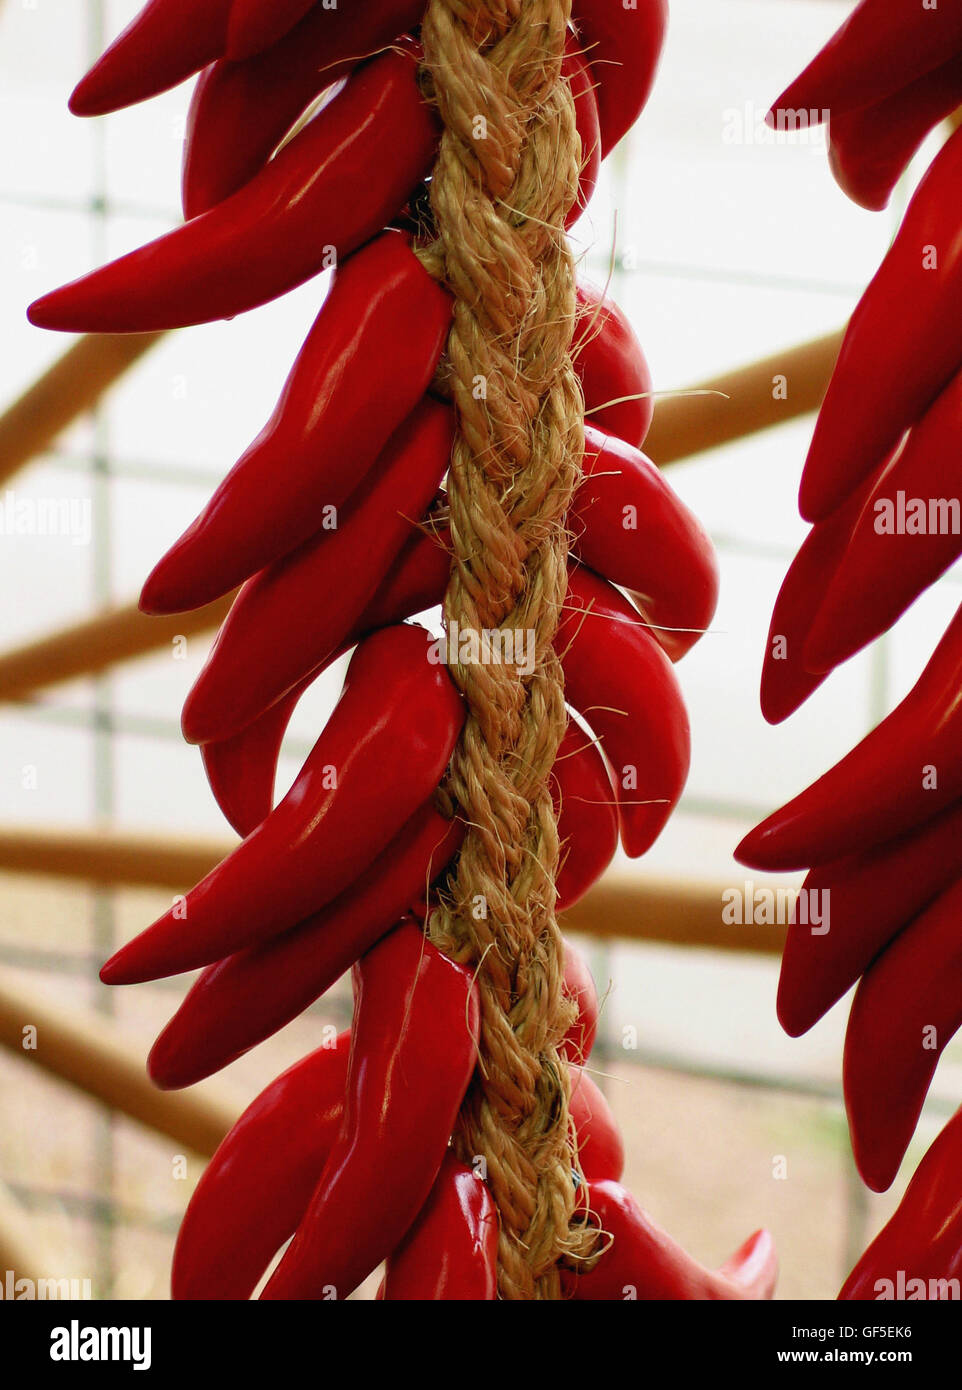 A string of bright red ripened Jalapeño peppers hang on a braided rope at a market in Tucson, Arizona, USA. Stock Photo